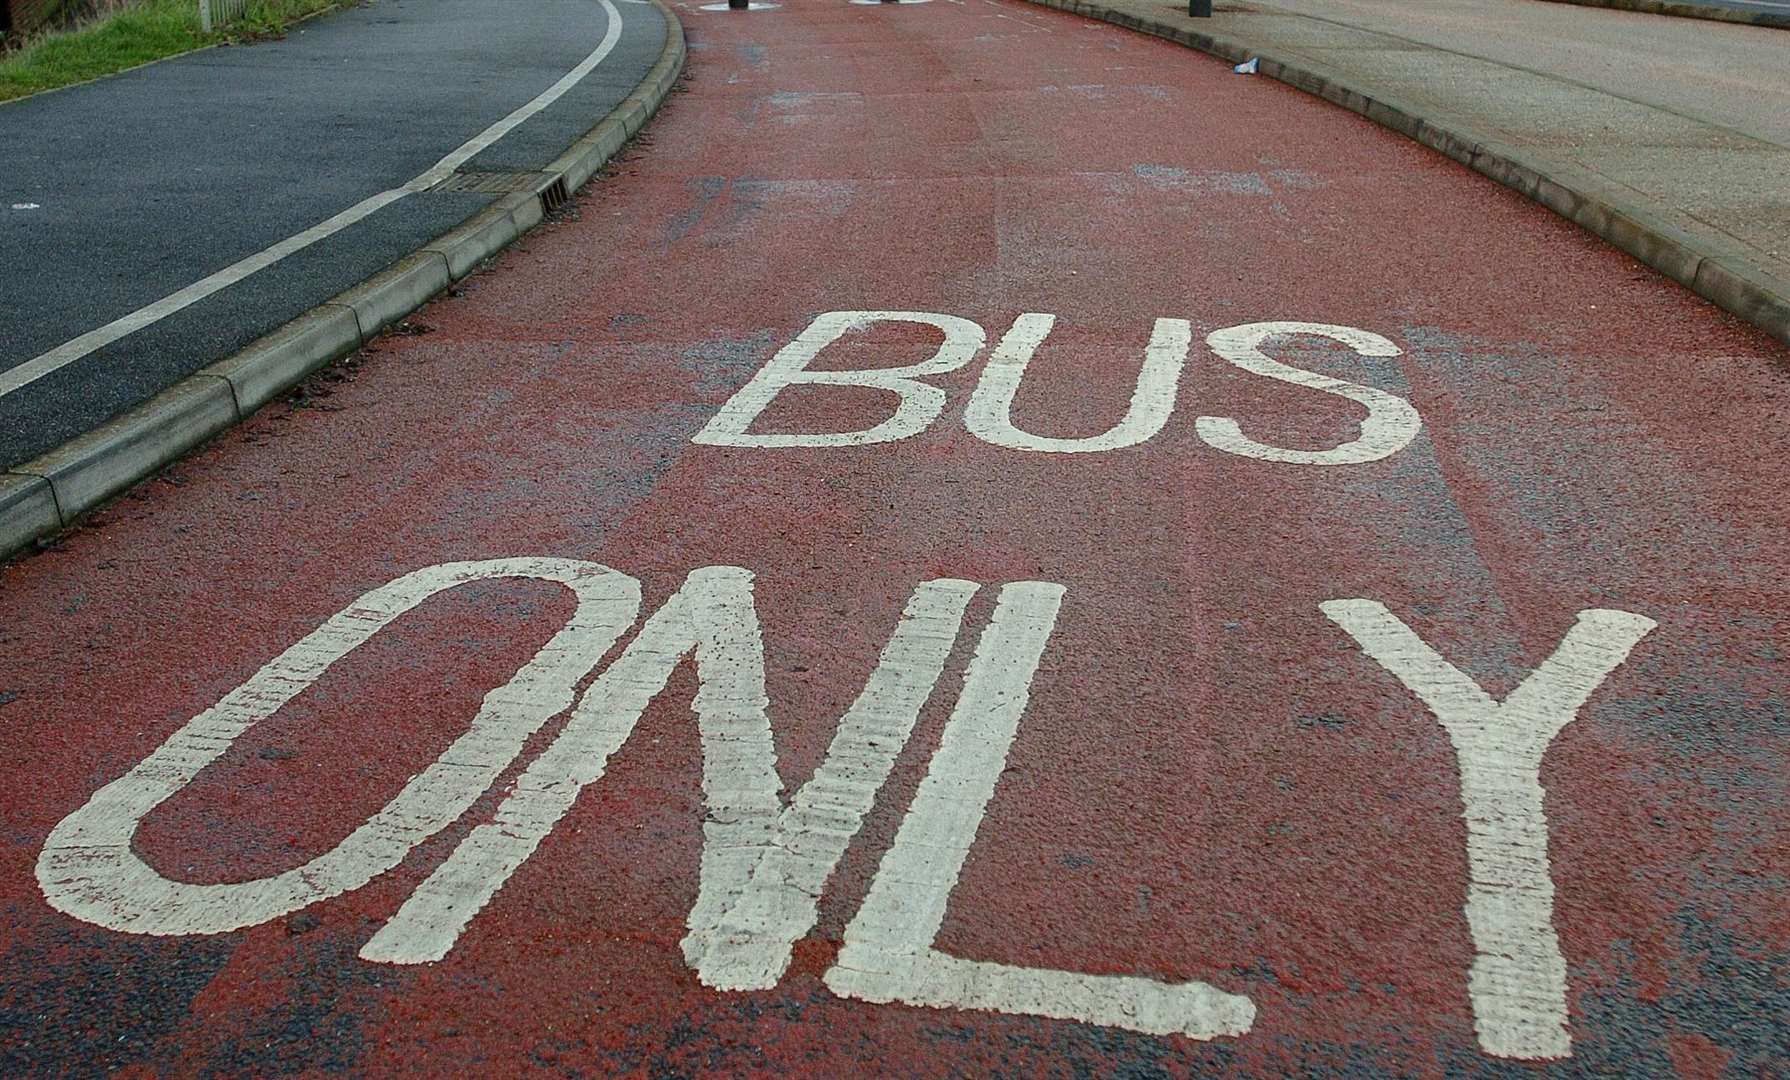 Moving traffic offence could include driving in bus and taxi lines or through no entry signs